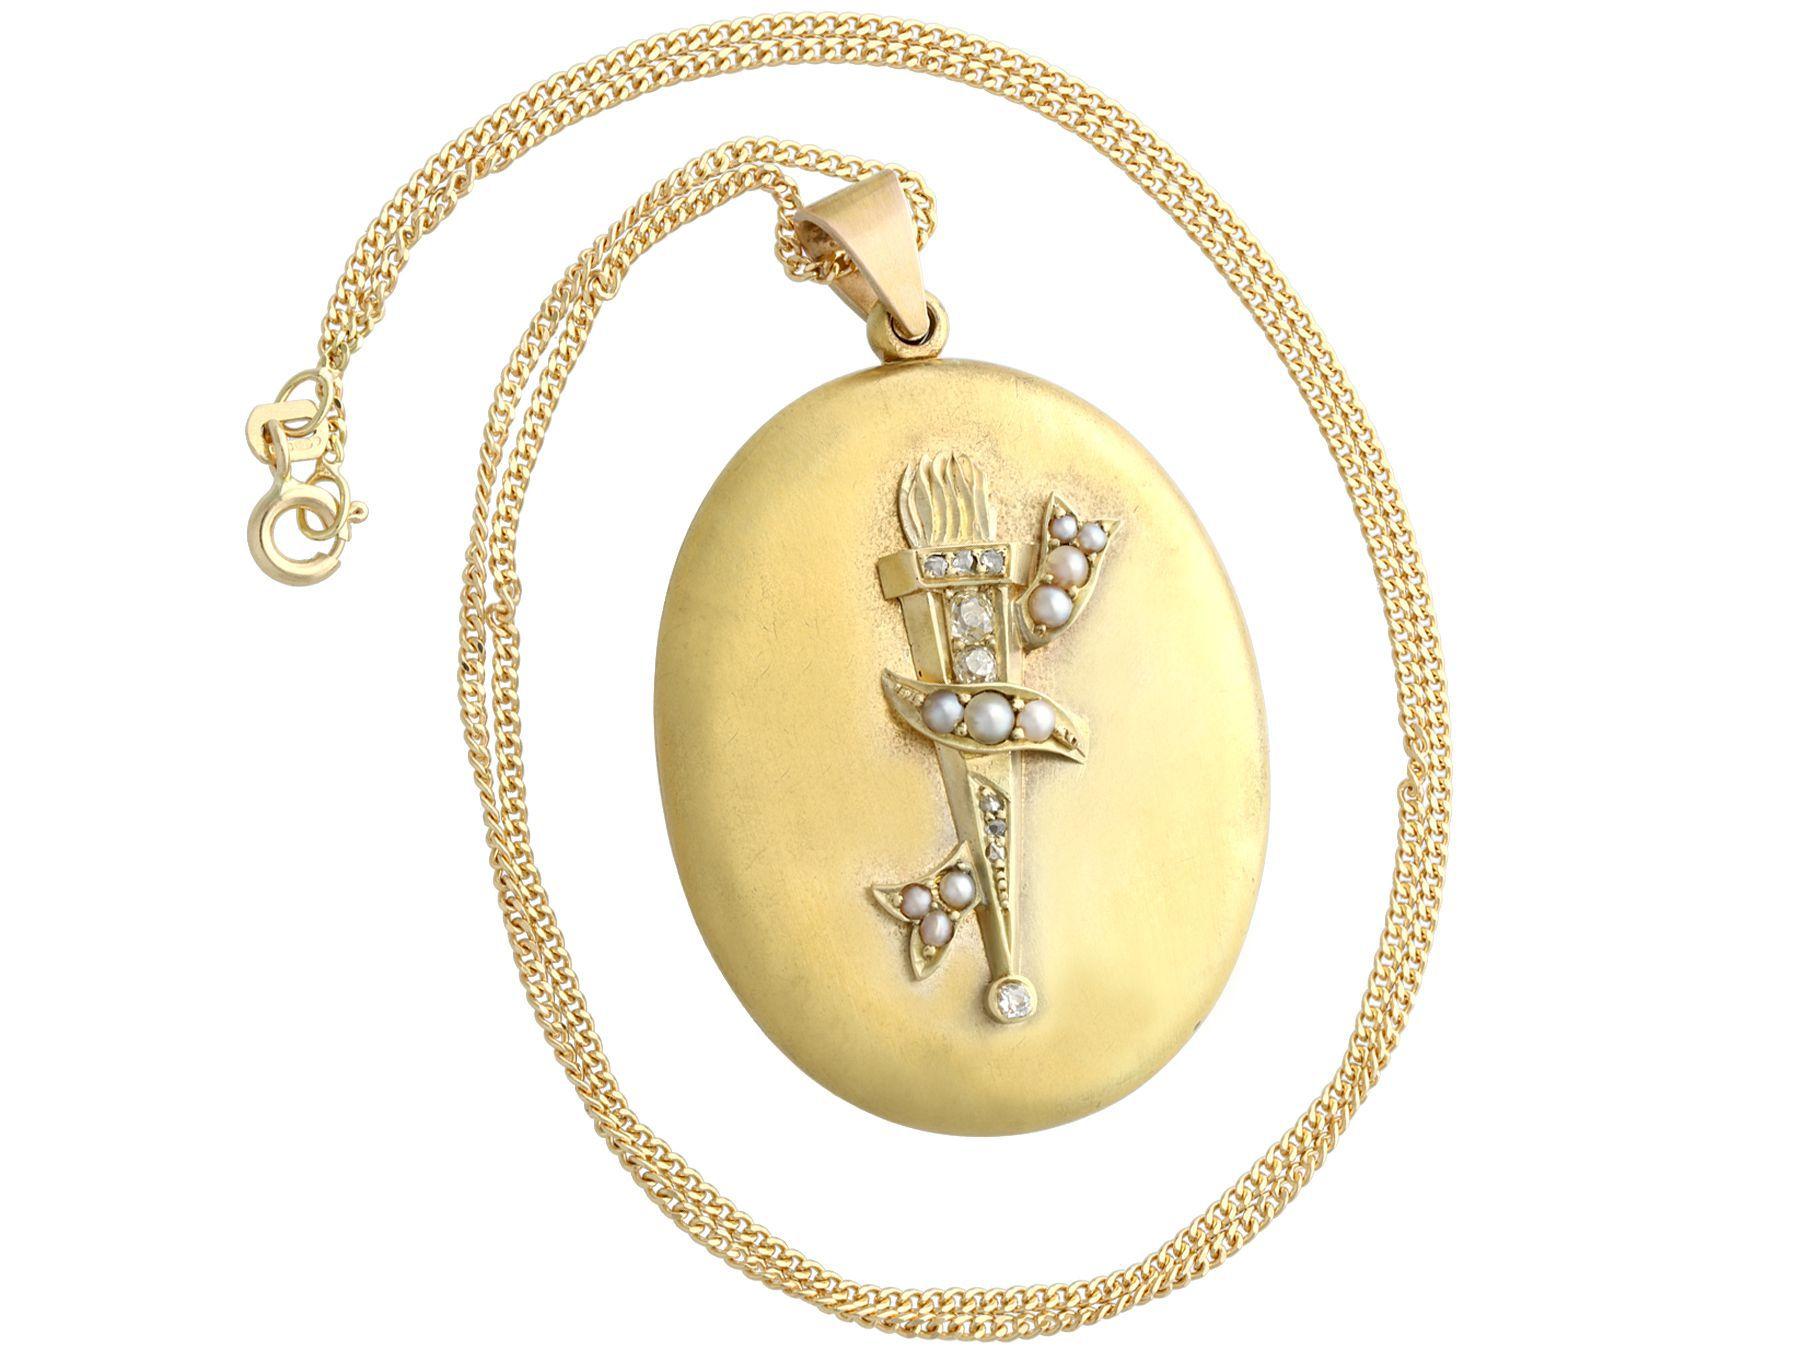 A fine and impressive antique Victorian 0.19 carat diamond and seed pearl, 15 karat yellow gold locket pendant; part of our diverse collection of Victorian lockets.

This fine and impressive Victorian locket has been crafted in 15k yellow gold.

The